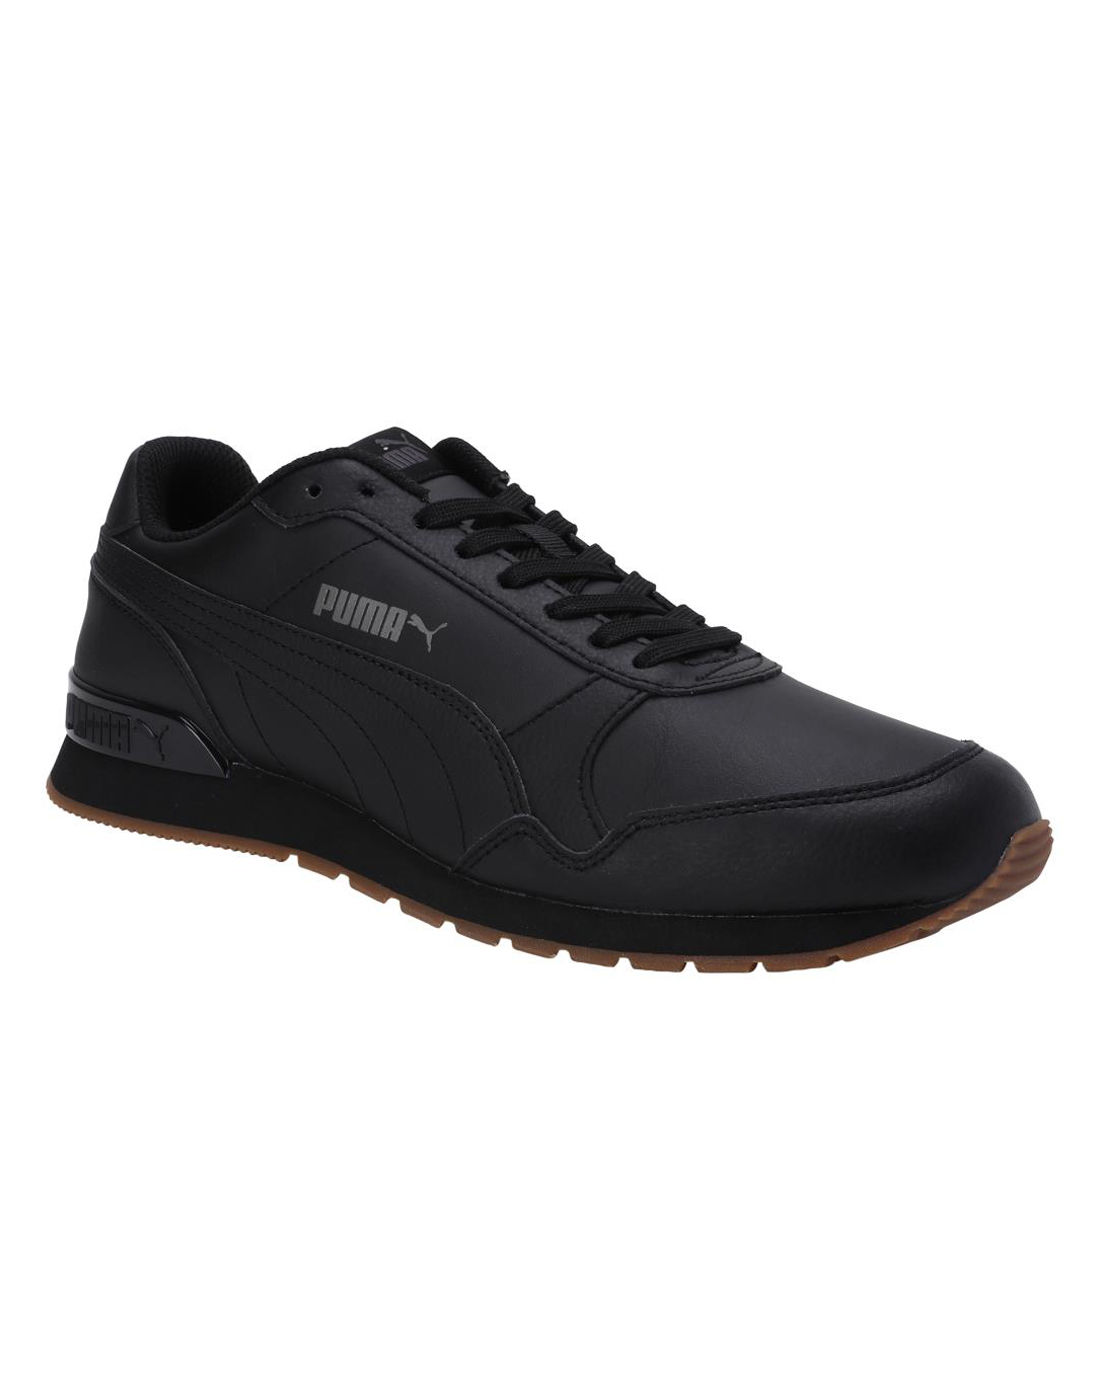 Puma ST Runner V2 Full L Unisex Casual Shoes - Black: Buy Puma ST Runner V2 Full L Unisex Casual Shoes - Black Online at Best Price in India Nykaa